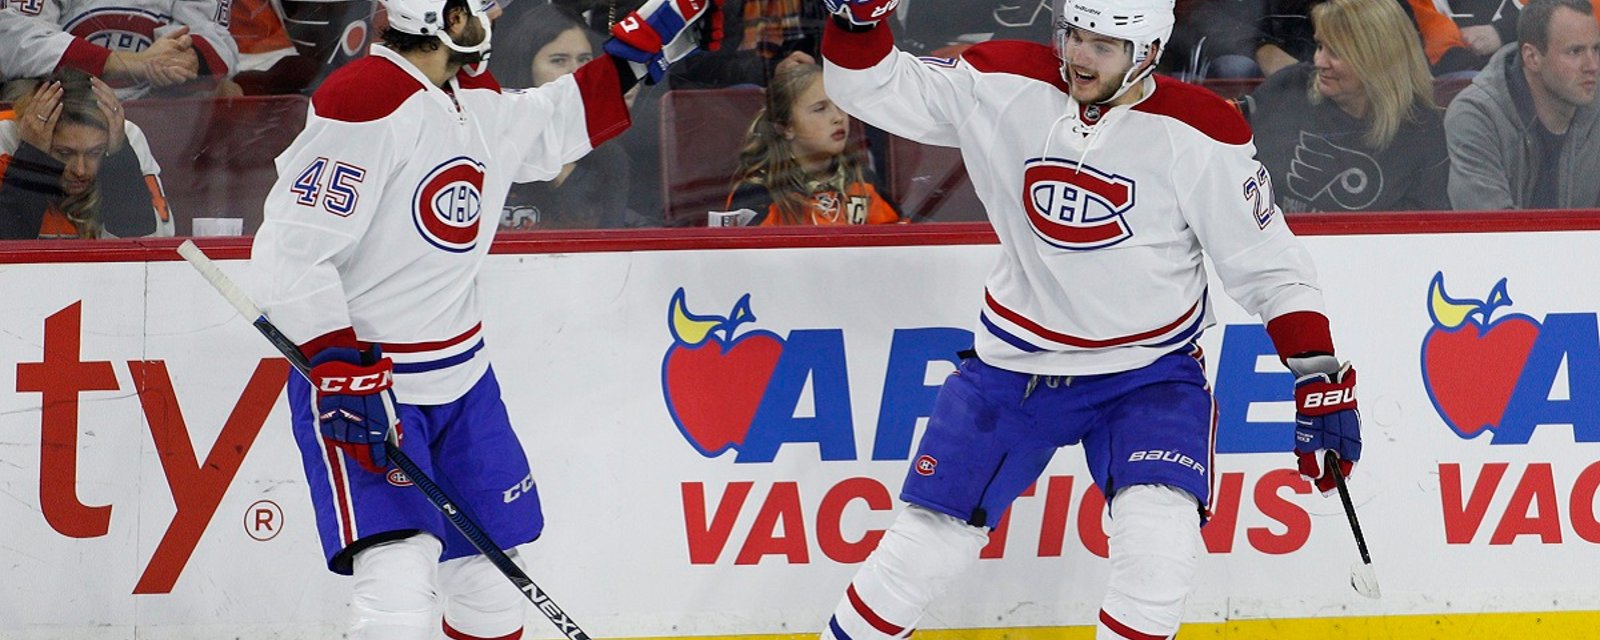 Rumor: Montreal Canadiens may deal one of their top forwards.